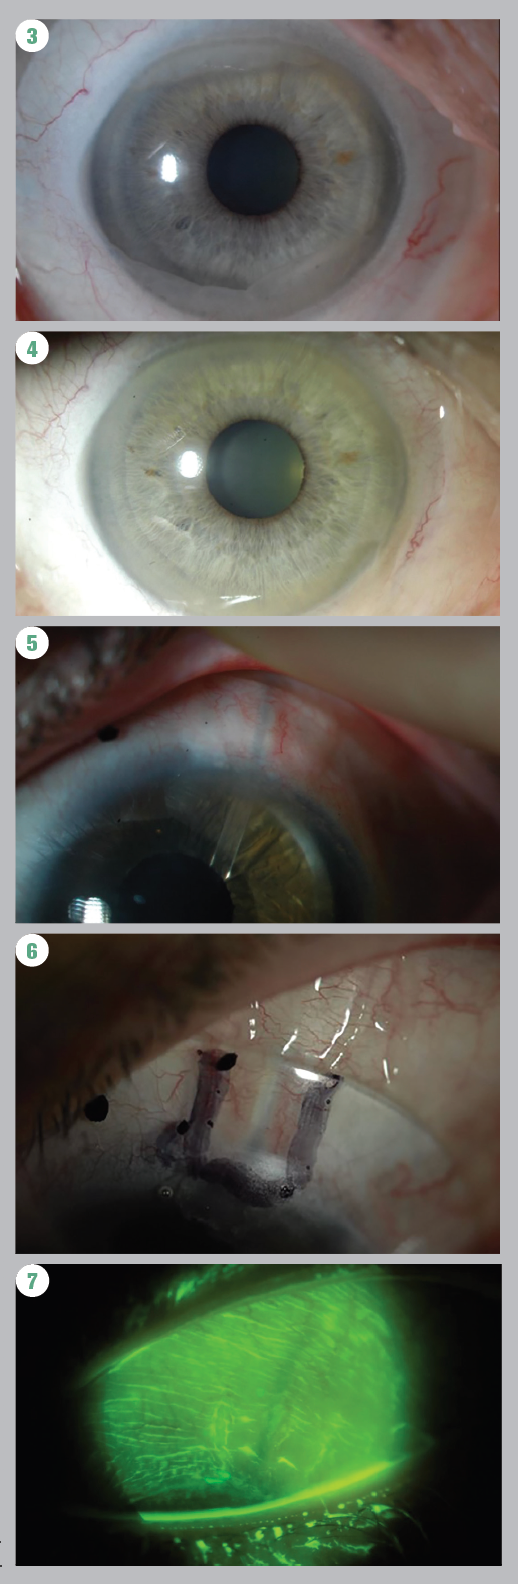 Figure 3. Conjunctival prolapse seen under scleral lenses.

Figure 4. Follow-up at 10 years with no cornea sequalae despite scleral lens fit with conjunctival prolapse.

Figure 5. Glaucoma Ahmed tube.

Figure 6. Scleral lens fit with a channel to accommodate tube.

Figure 7. No staining on tube observed after scleral lens wear.